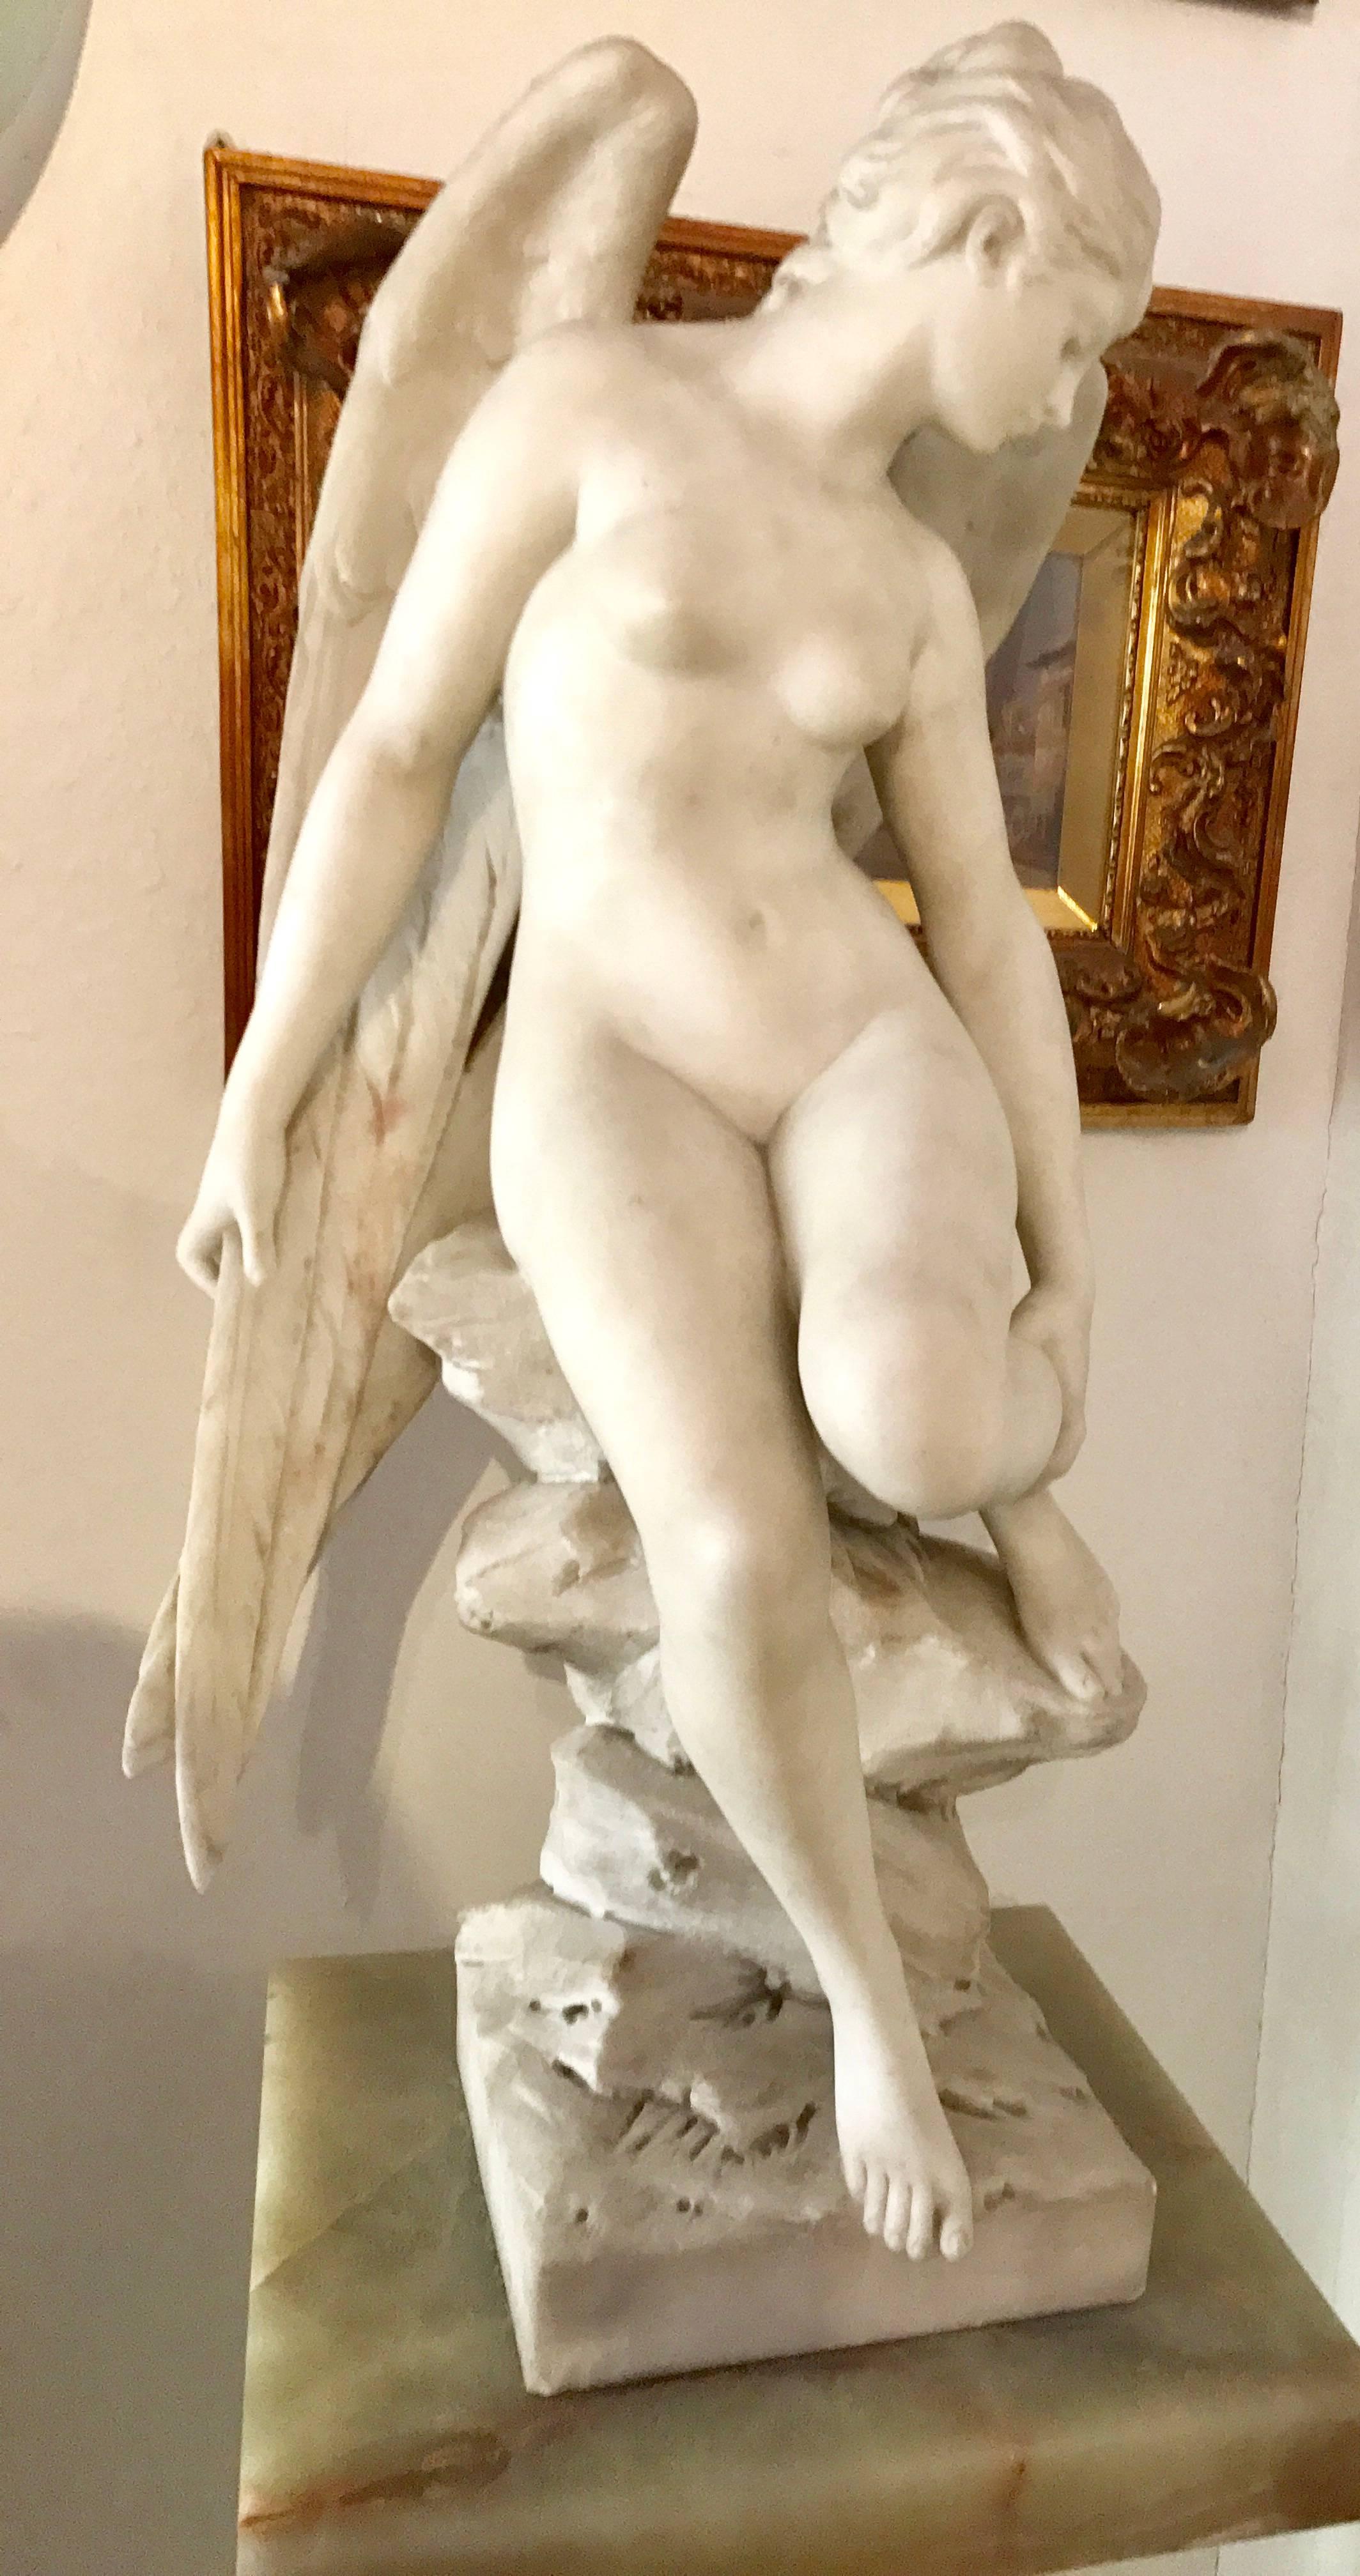 Hand-Carved Tycoon's Italian Carrara Marble Angel Sculpture Signed A. Piazza, circa 1890 For Sale